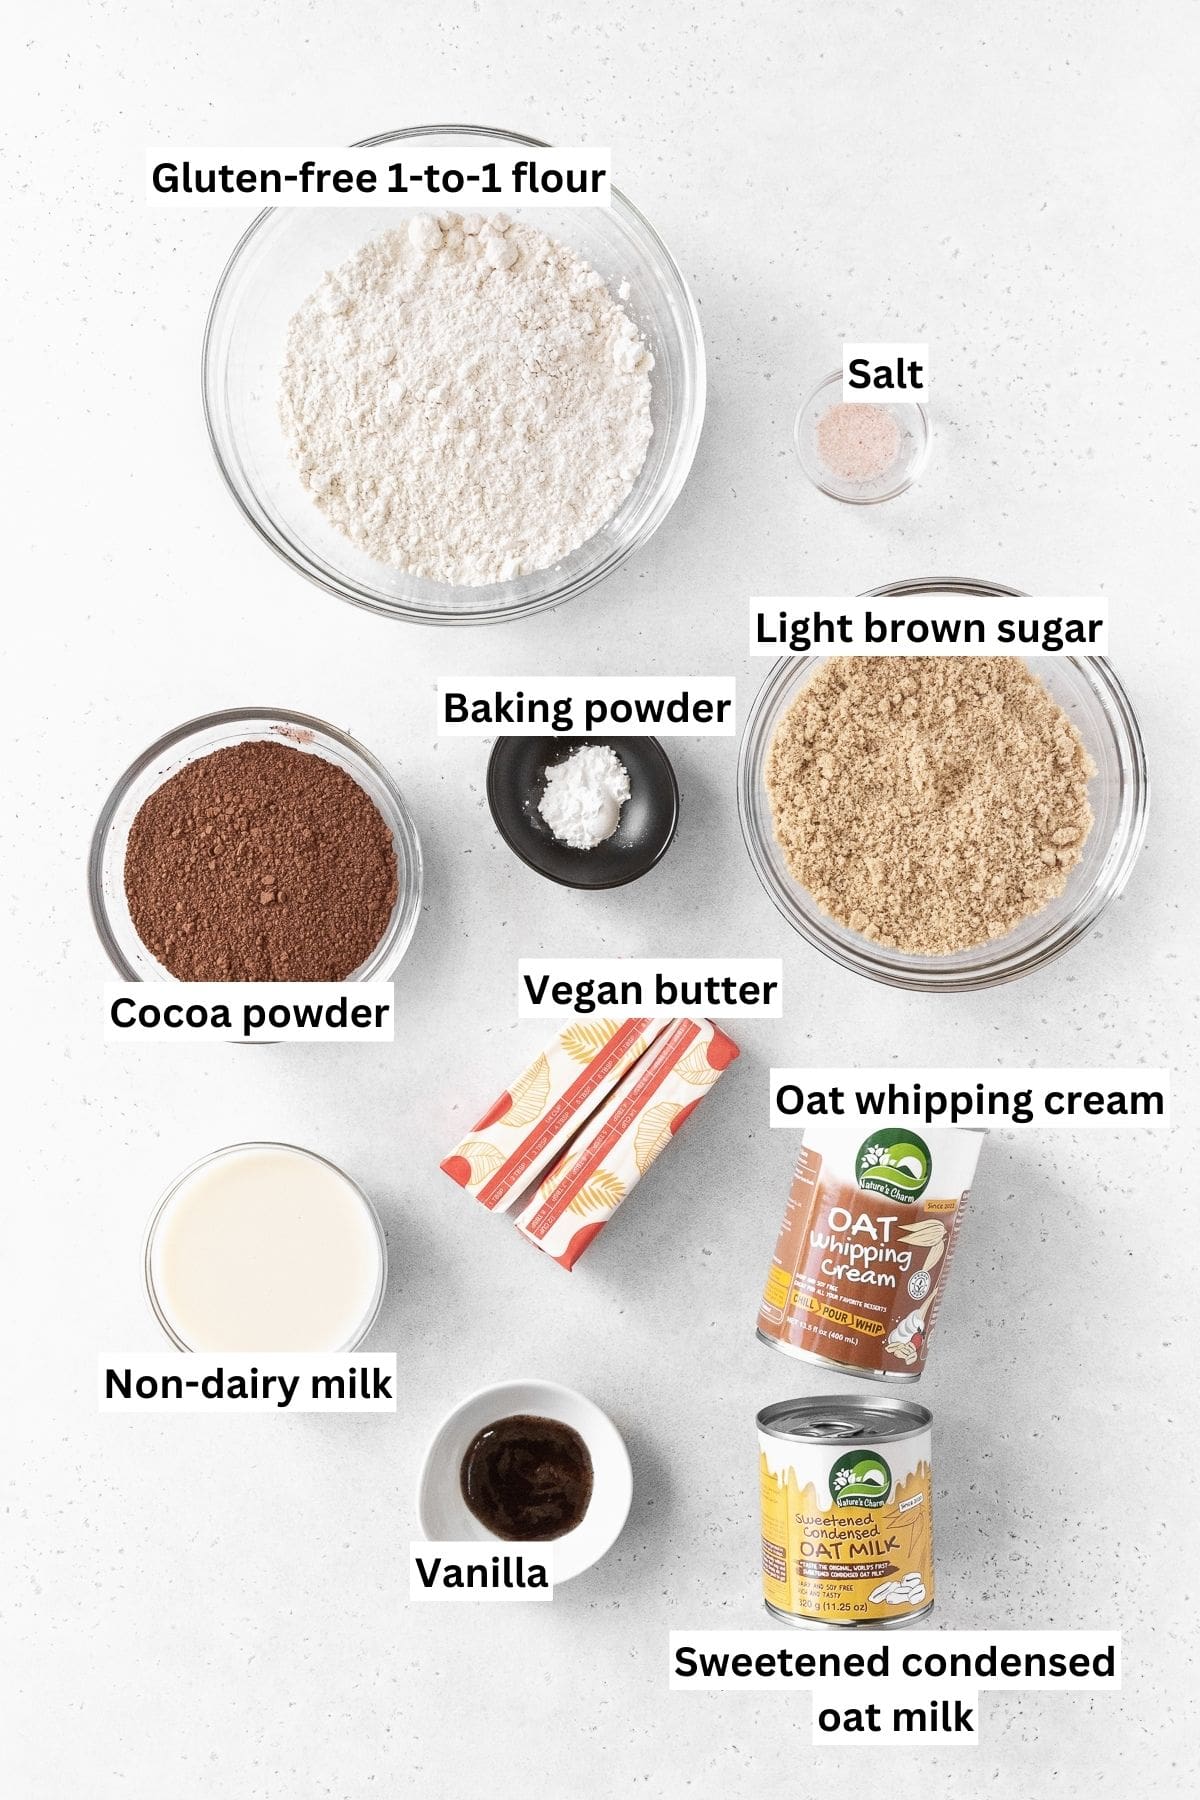 All of the ingredients for gluten-free ice cream sandwiches on a white background.